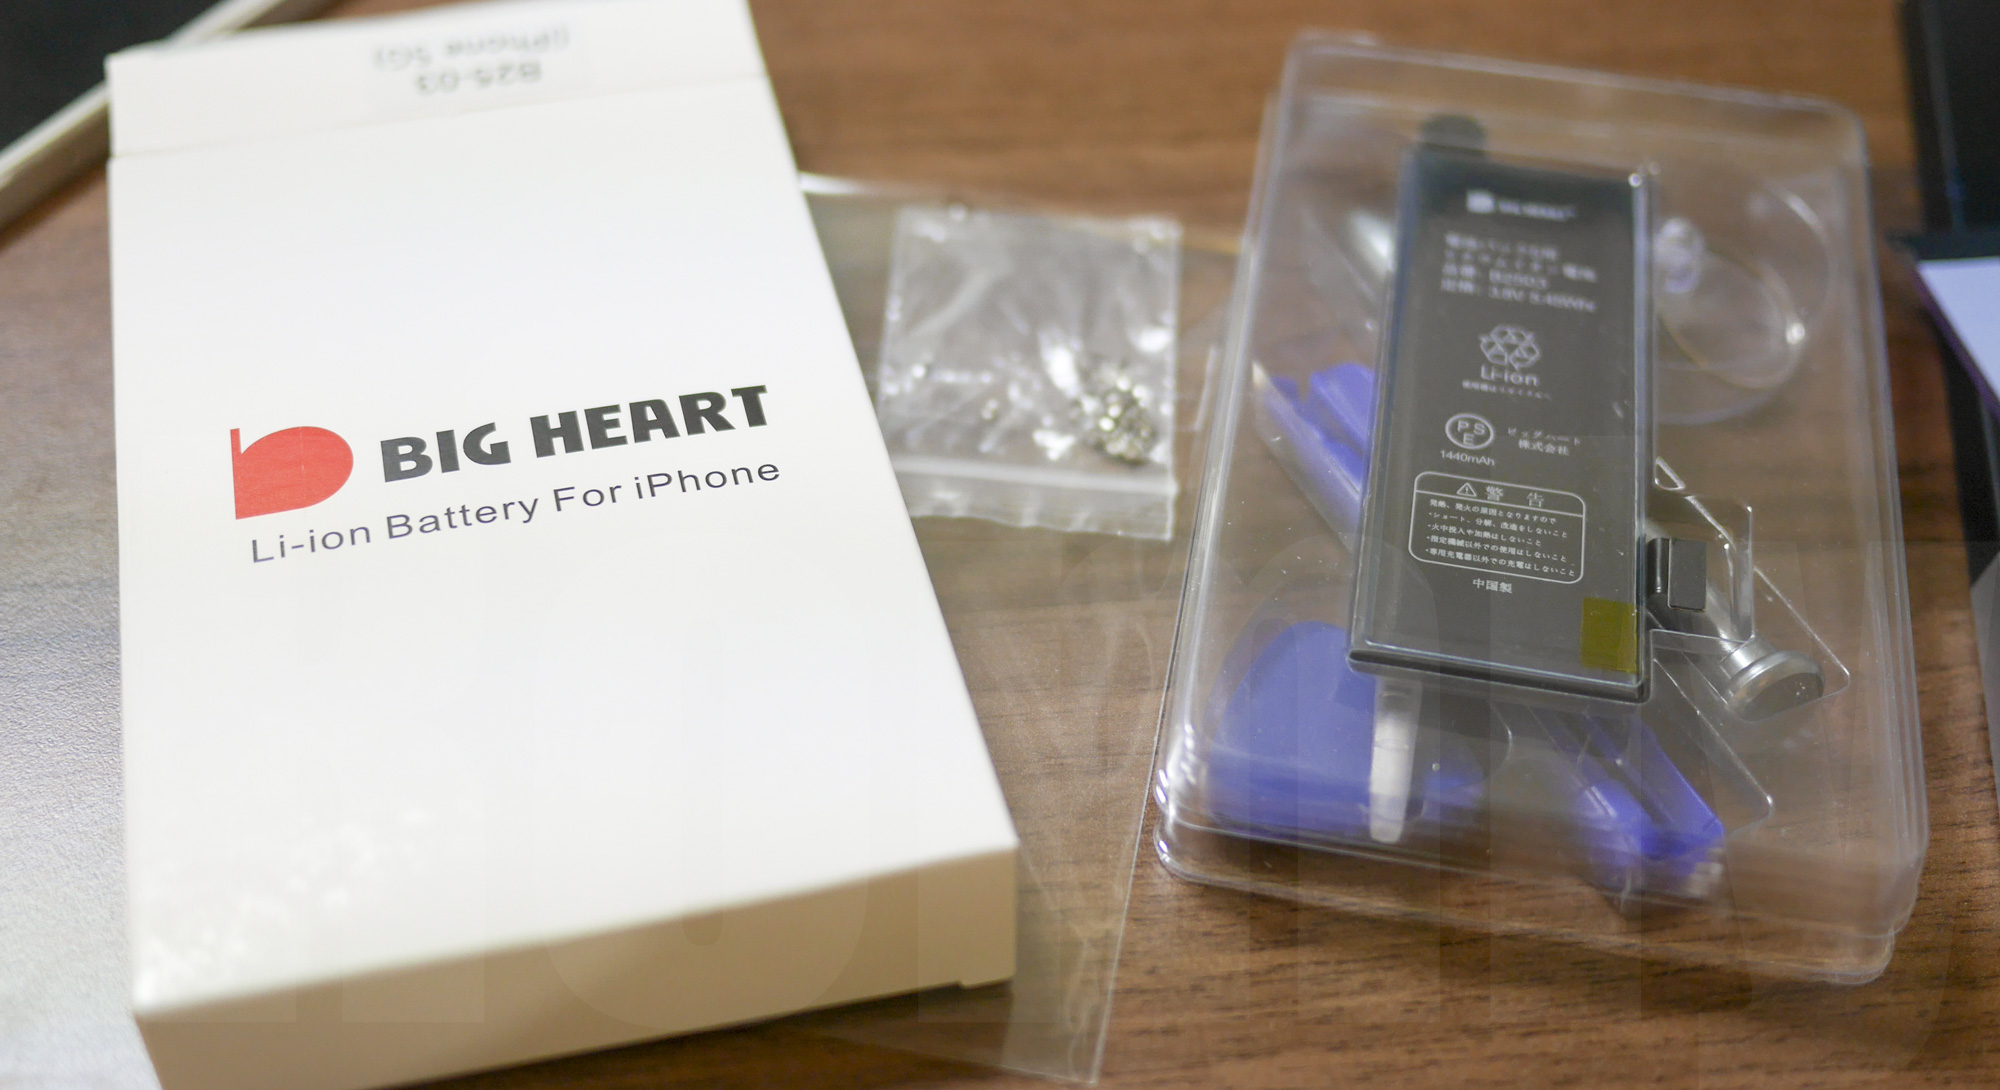 BIG HEART iPhone 5 Battery replacement kit